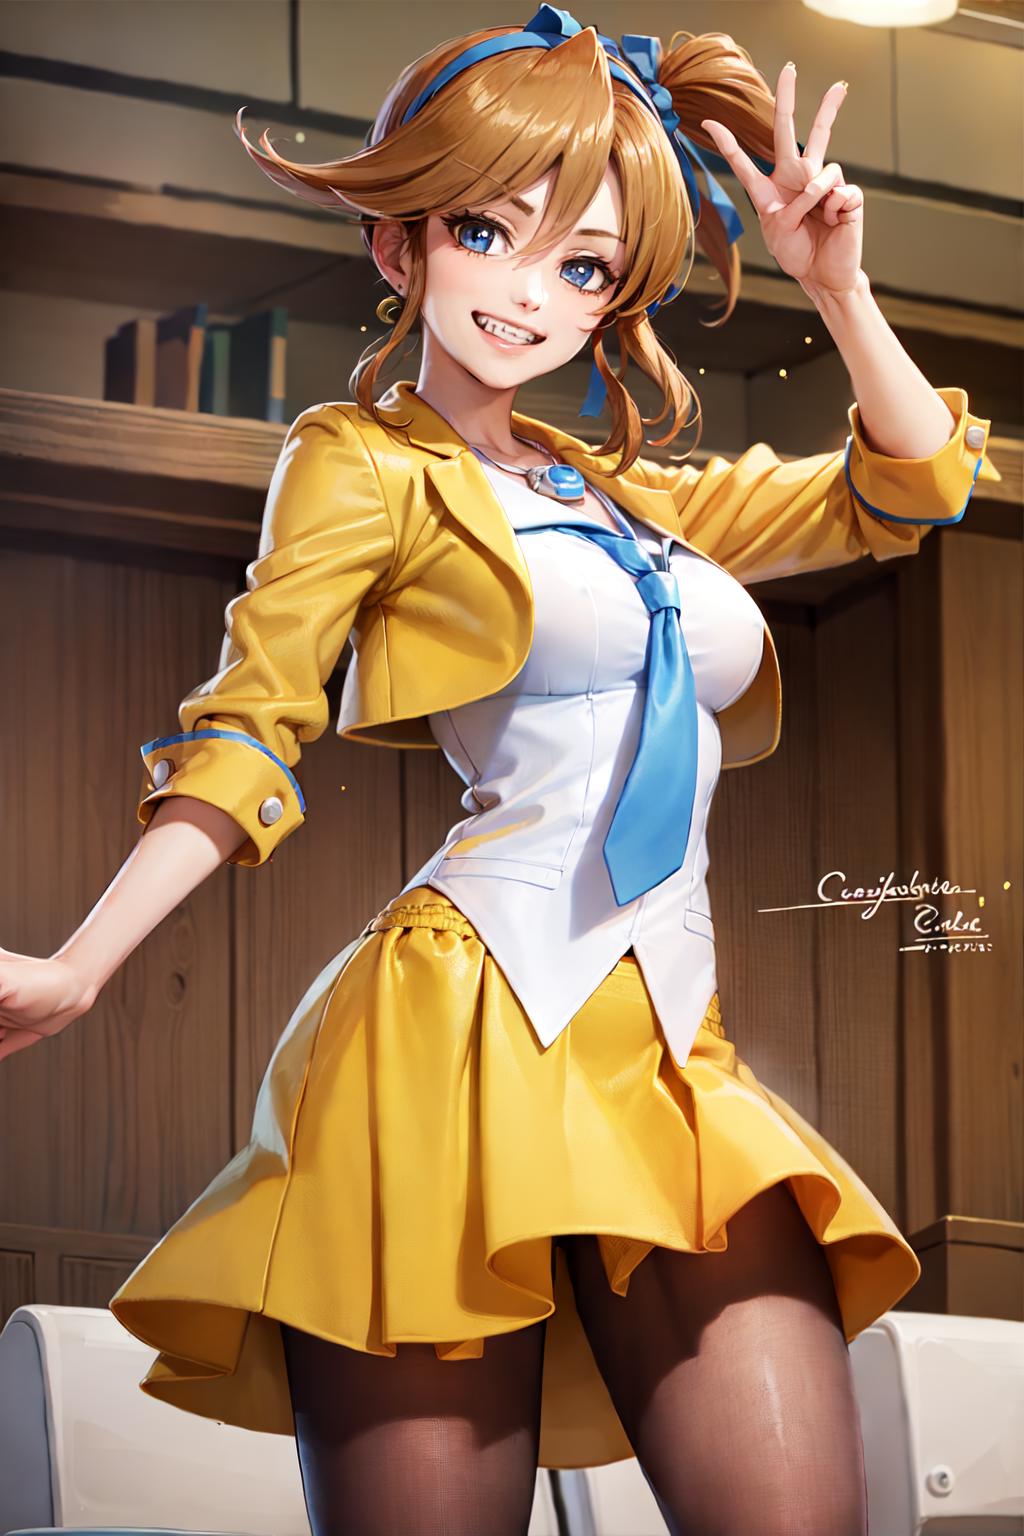 Athena Cykes | Ace Attorney image by justTNP